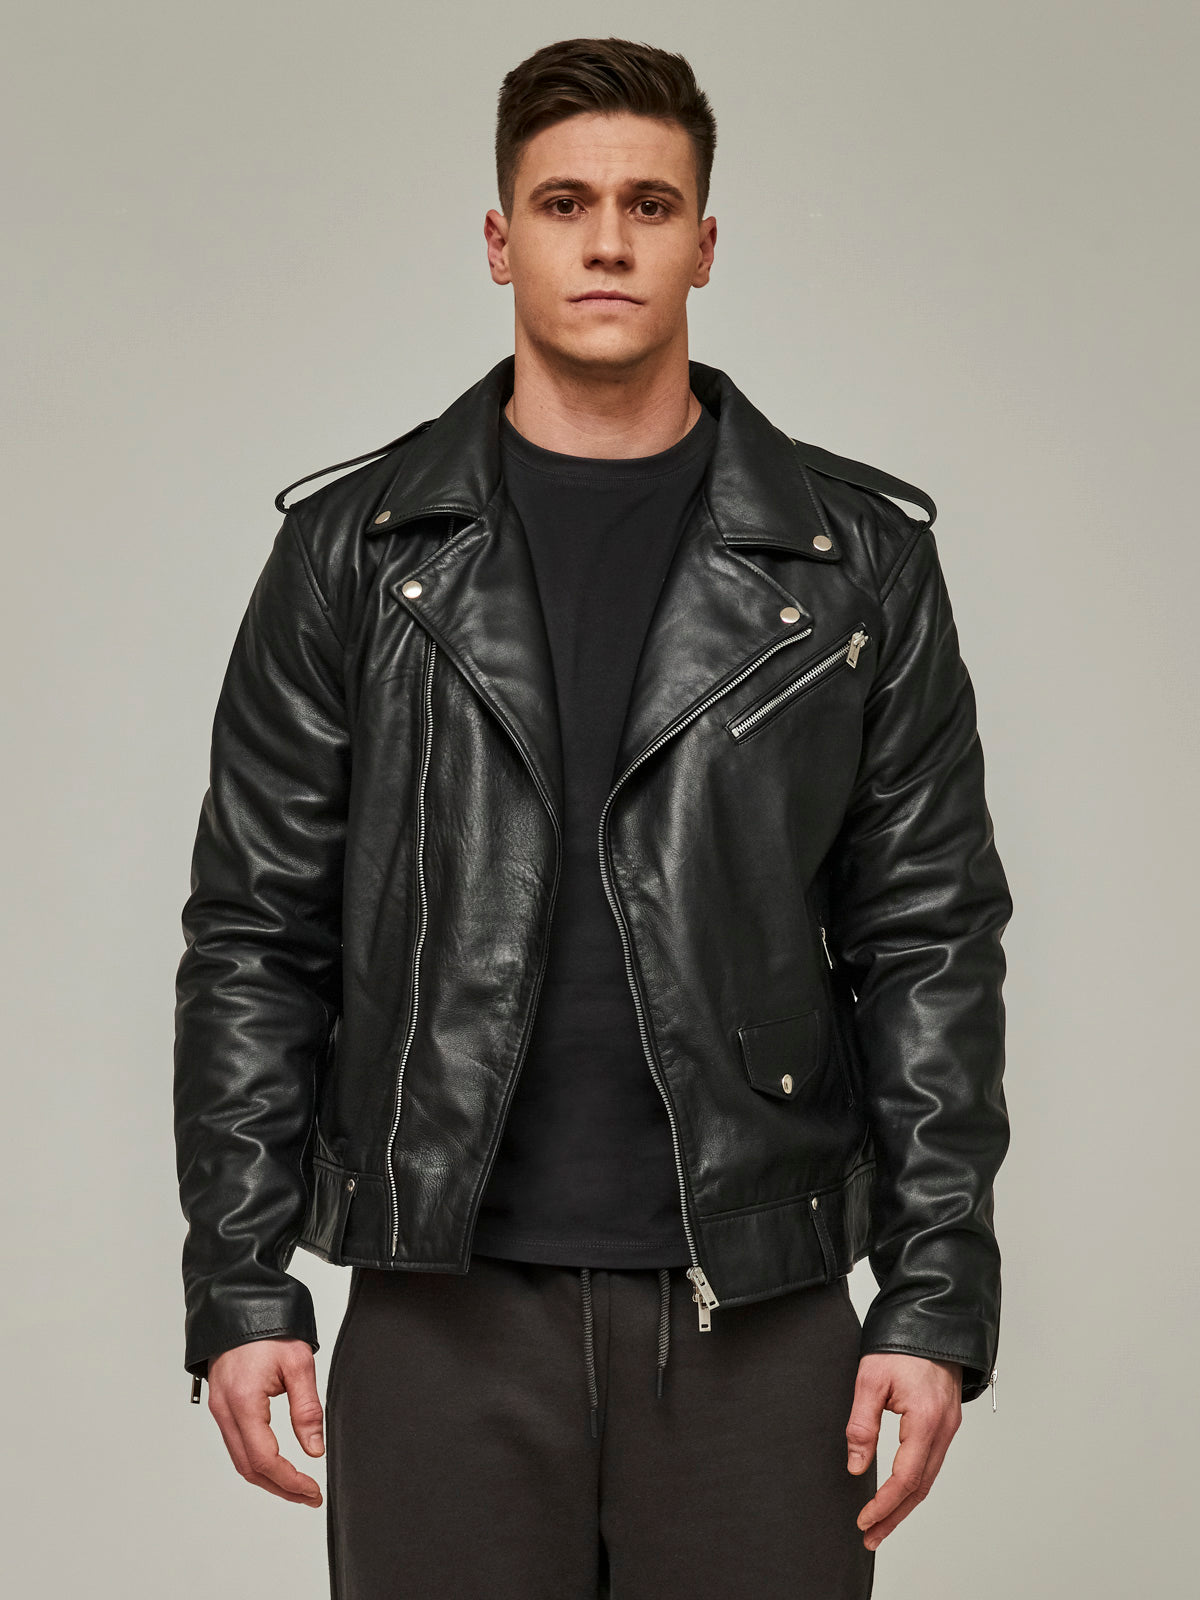 Carbon Gloss Leather Jacket Men/ LMTD Edition